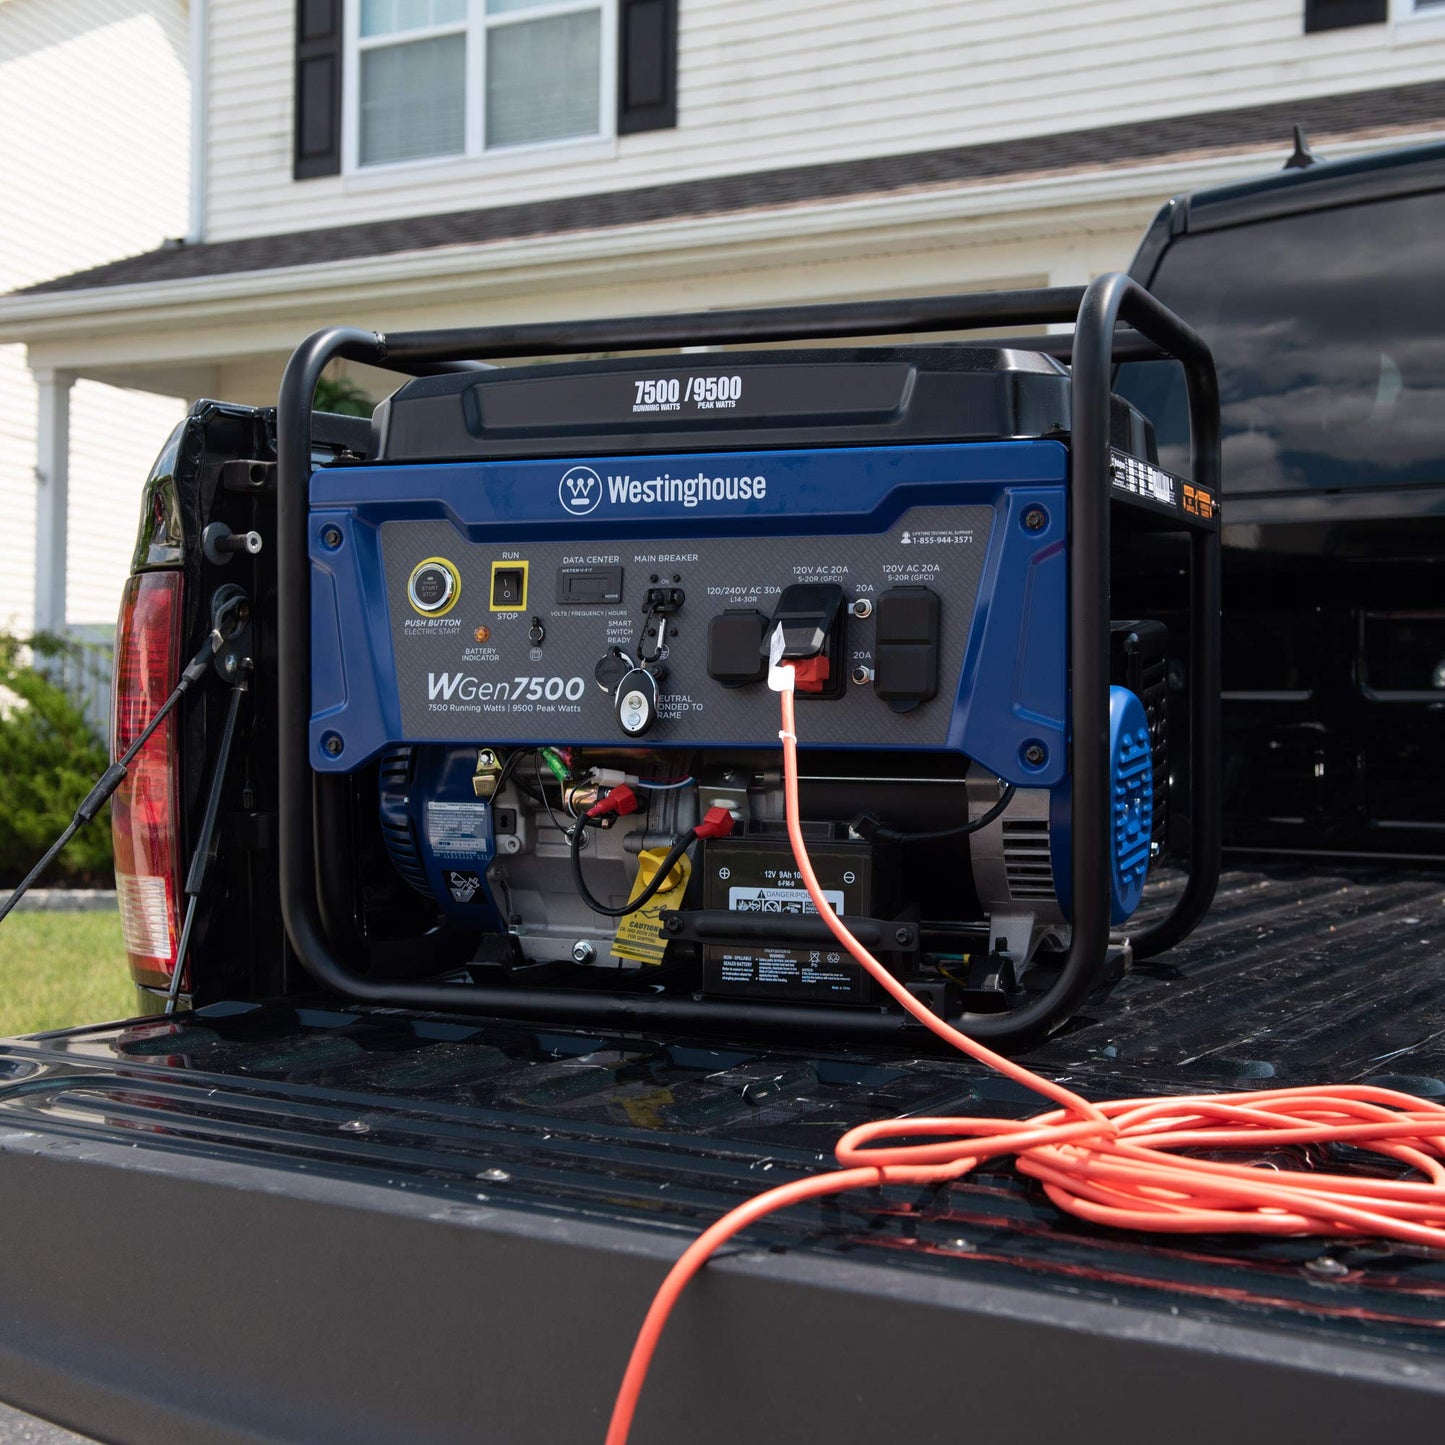 Westinghouse Outdoor Power Equipment 9500 Peak Watt Home Backup Portable Generator, Remote Electric Start with Auto Choke, Transfer Switch Ready 30A Outlet, Gas Powered, CARB Compliant 9500W